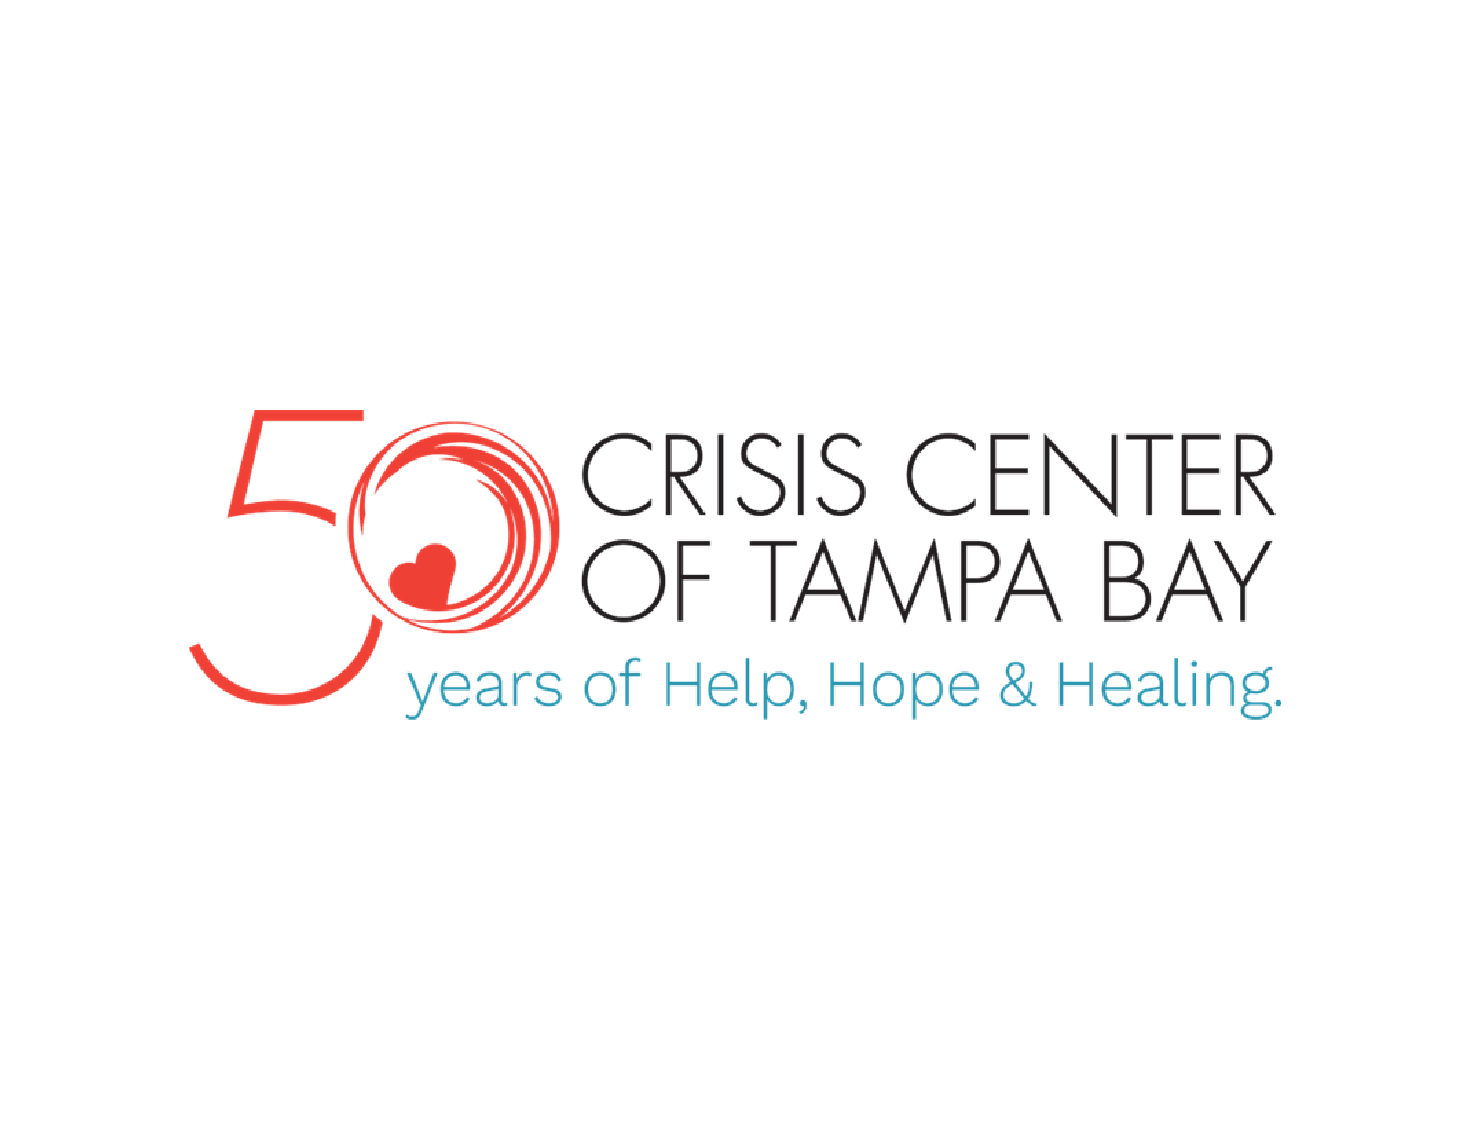 The Crisis Center of Tampa Bay